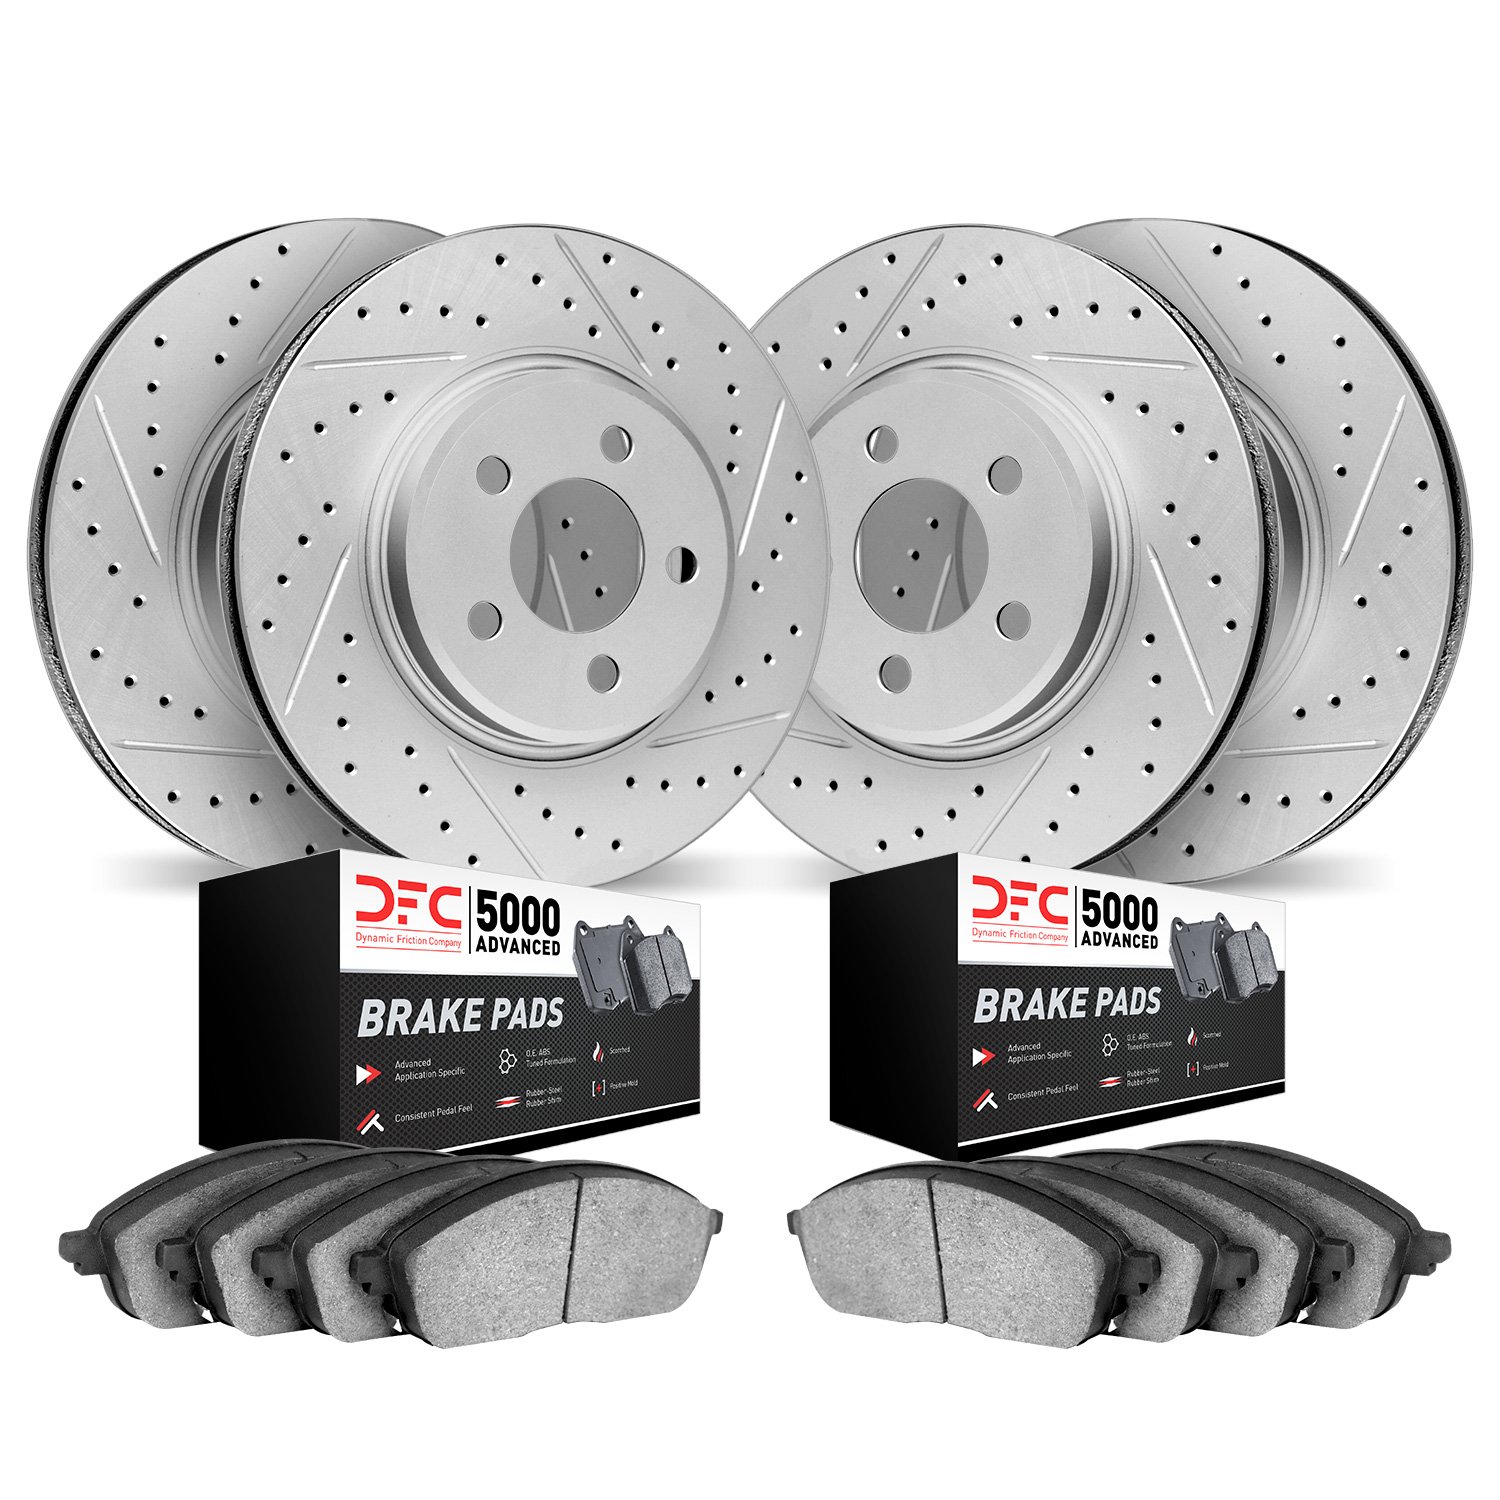 2504-31004 Geoperformance Drilled/Slotted Rotors w/5000 Advanced Brake Pads Kit, 2001-2005 BMW, Position: Front and Rear